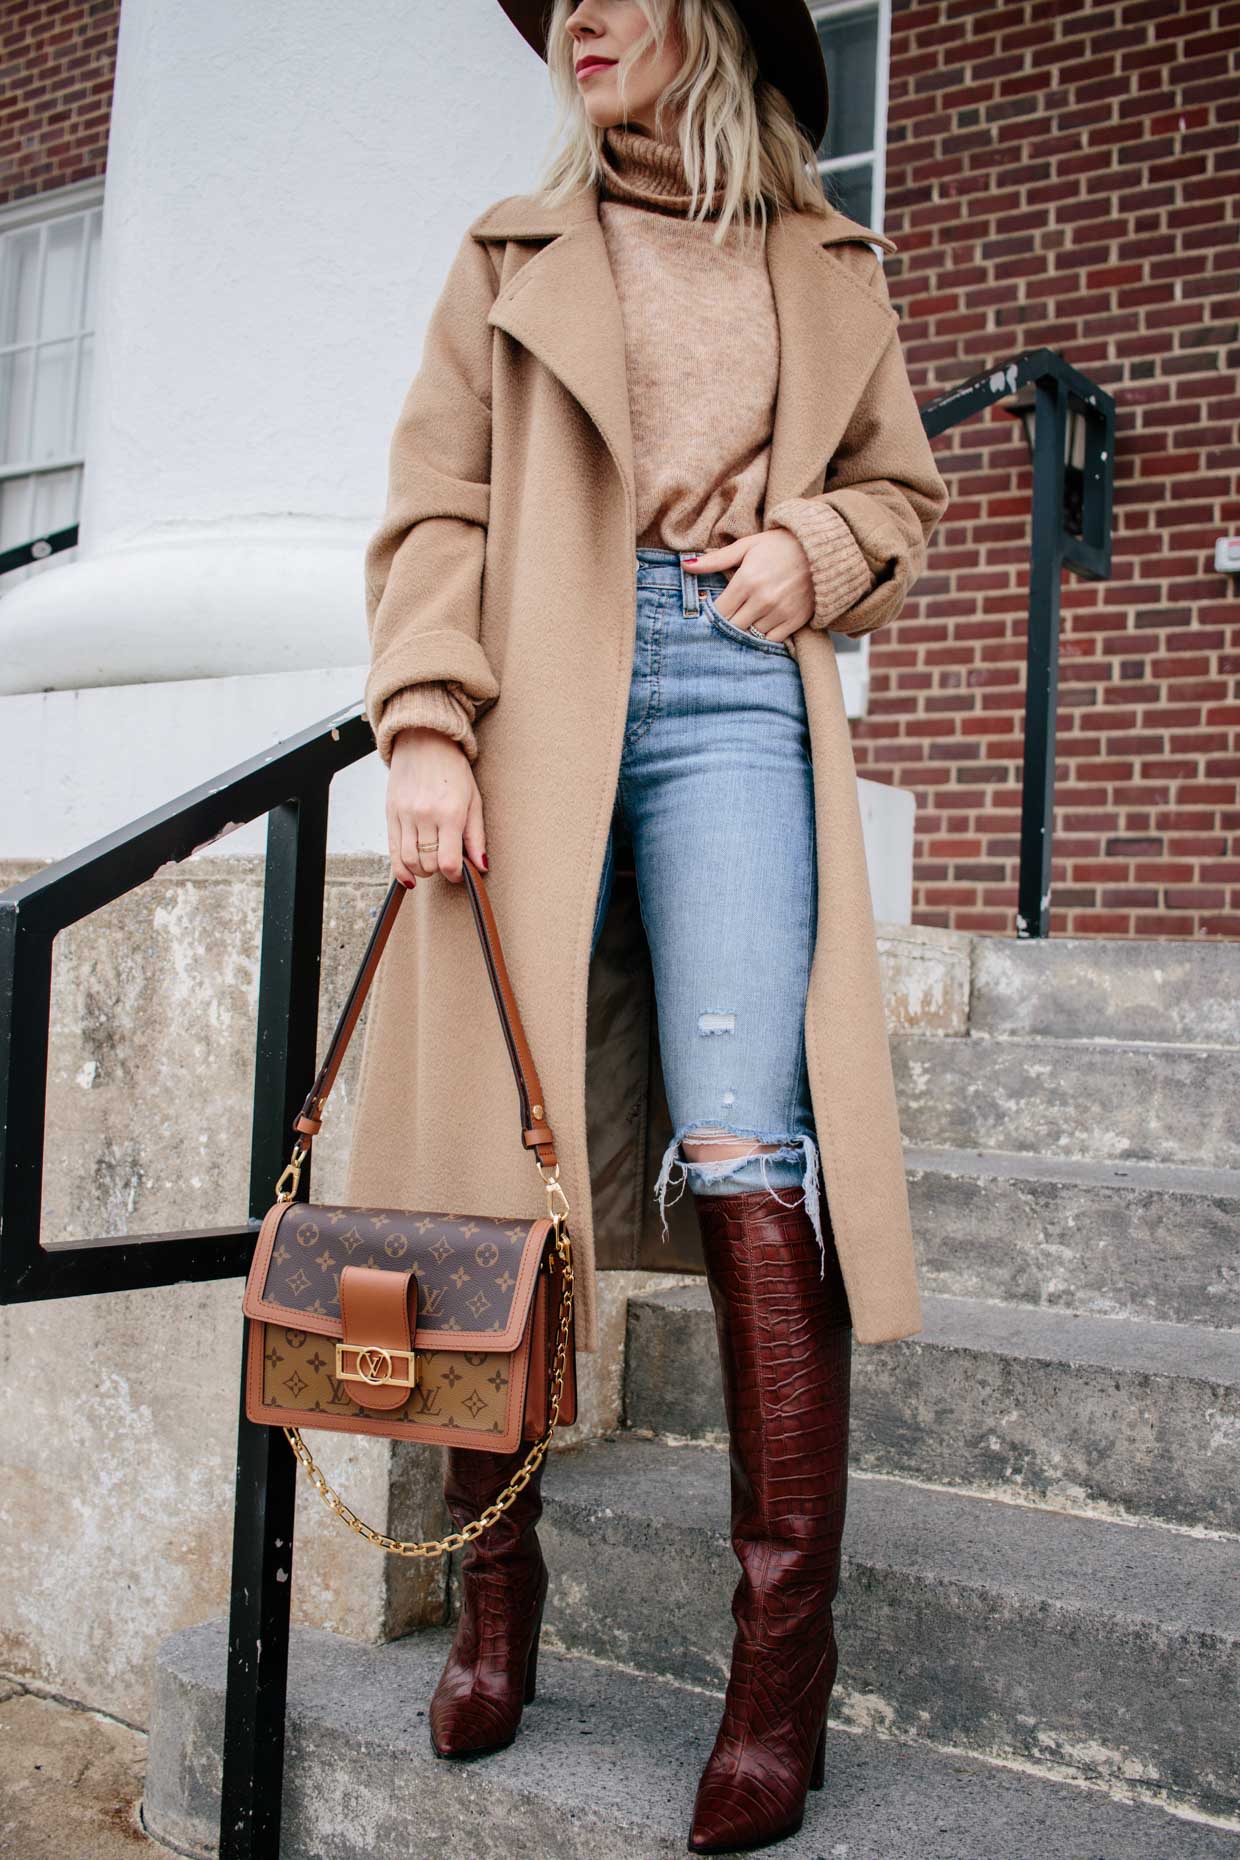 Meagan Brandon fashion blogger of Meagan's Moda shows how to wear a camel  coat with light denim and croc leather knee high boots for chic camel coat  outfit - Meagan's Moda